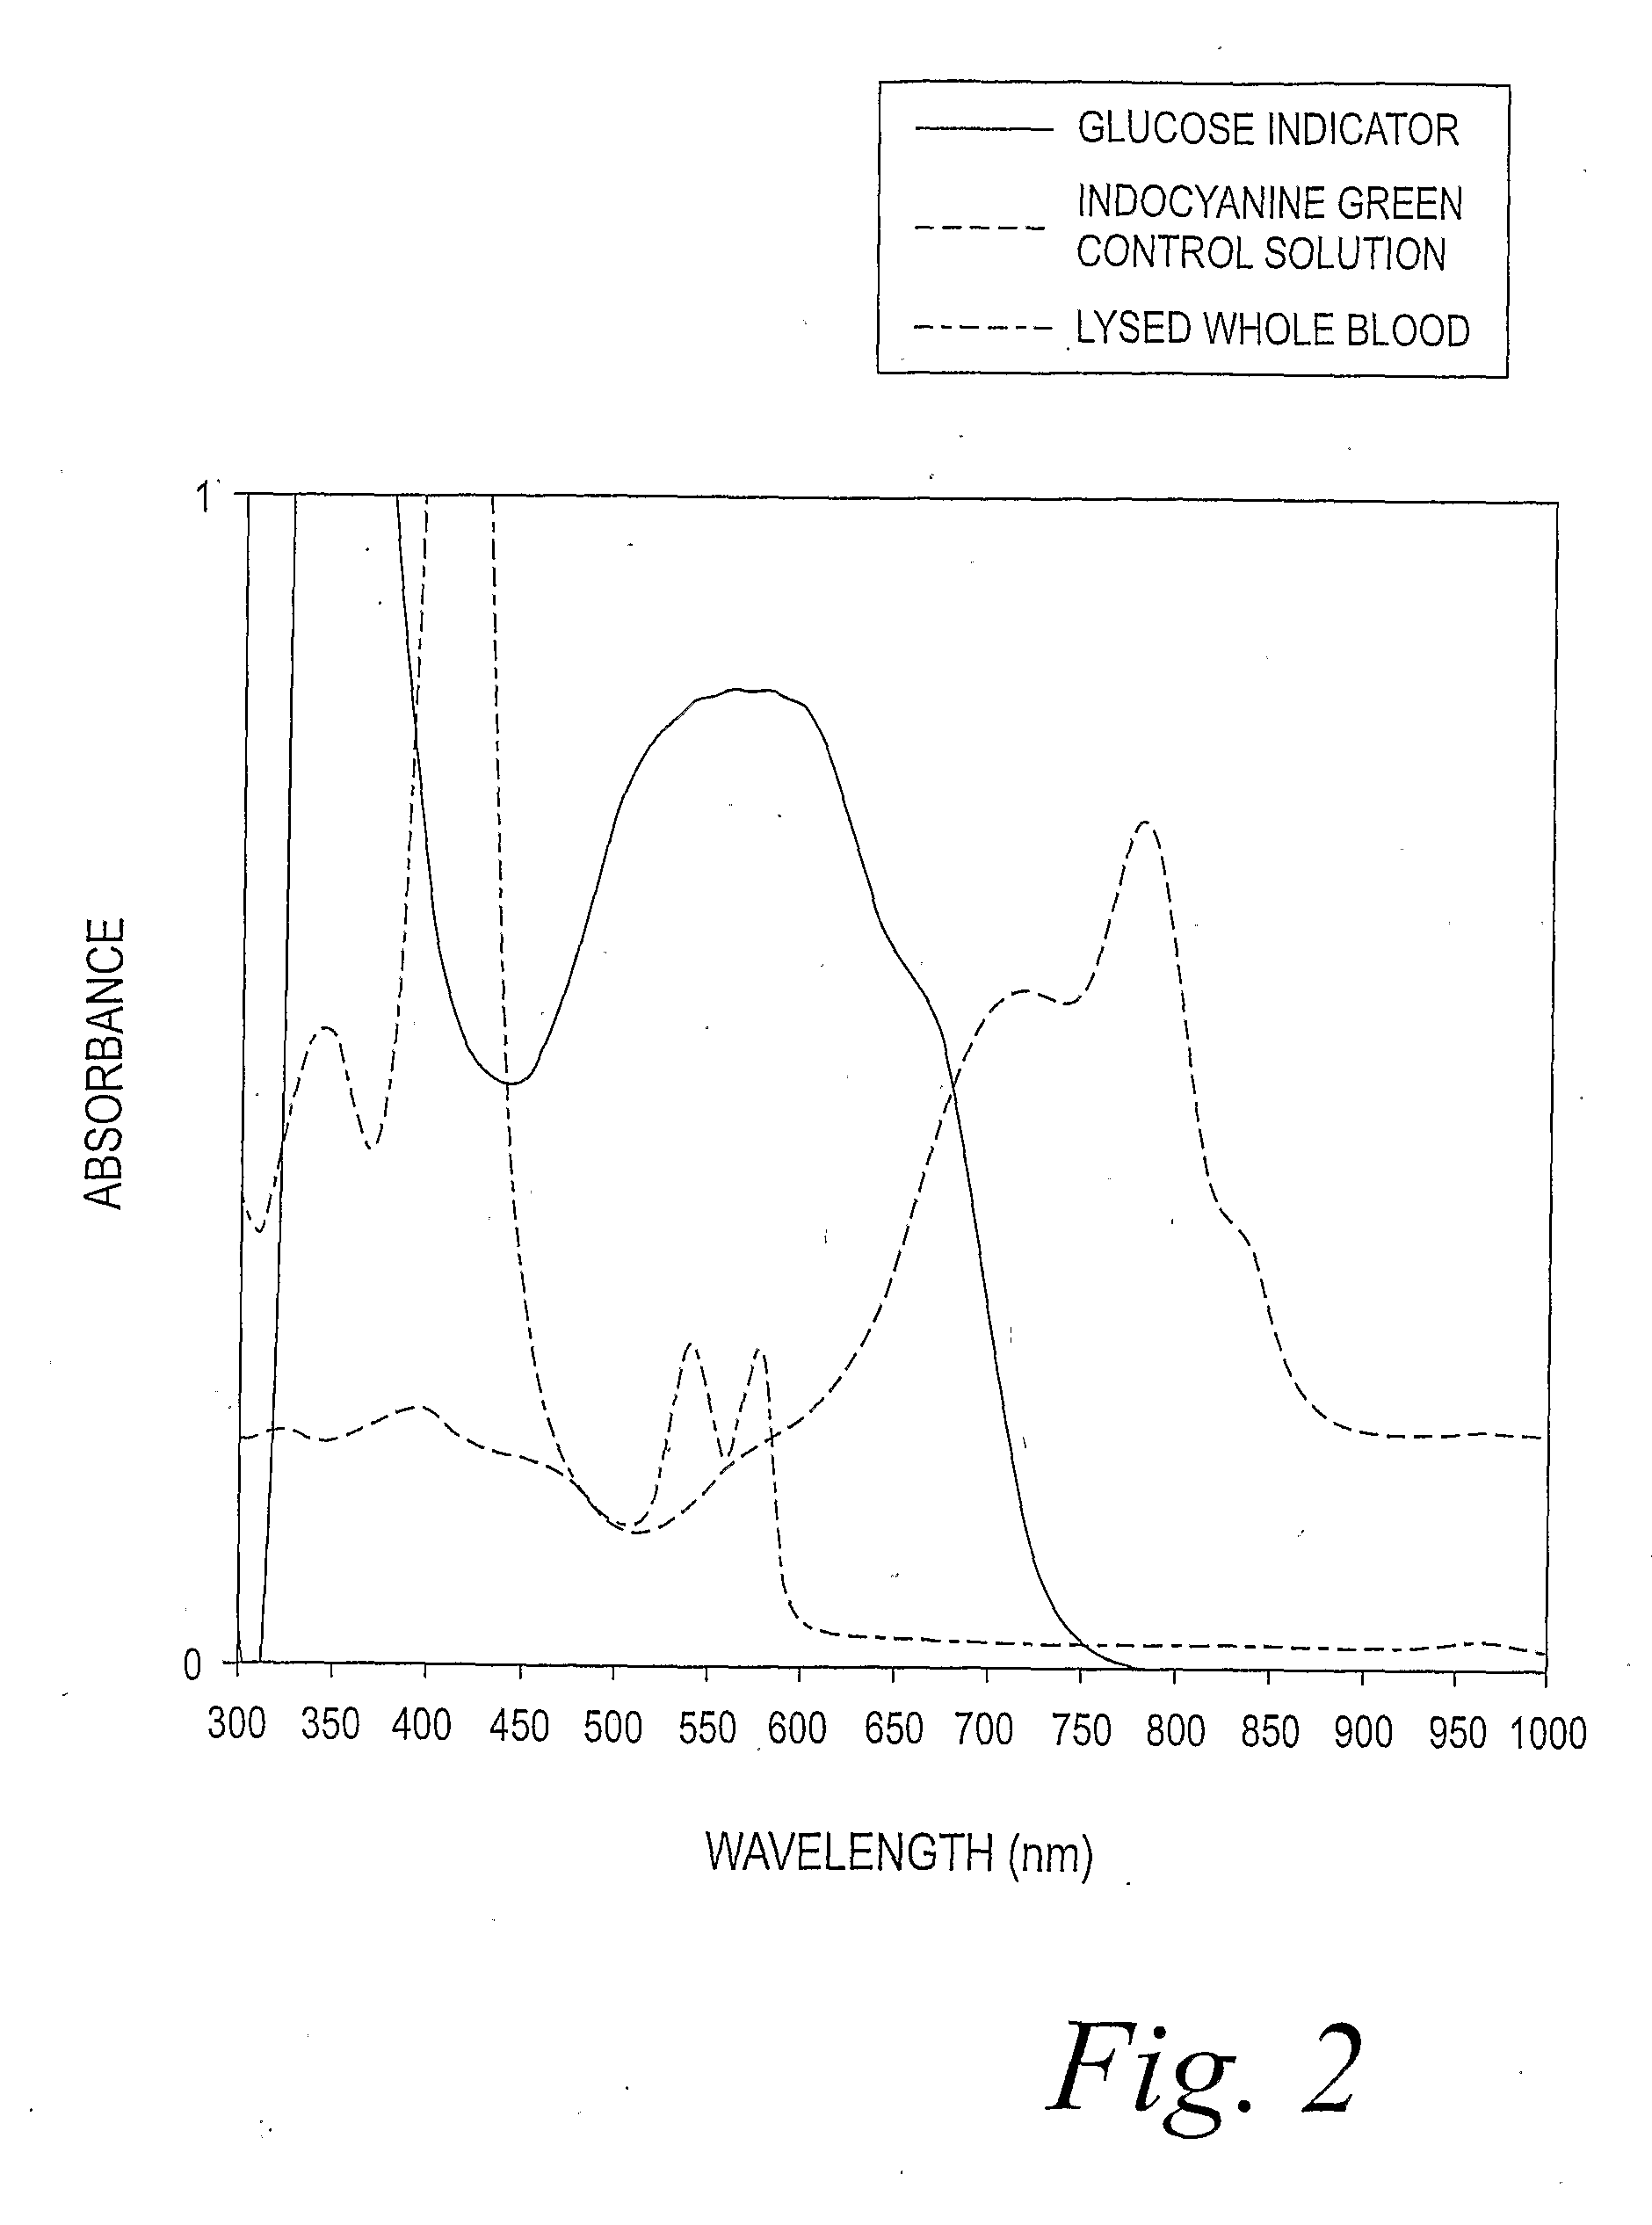 Method of Differentiating Between Blood and Control Solutions Containing a Common Analyte